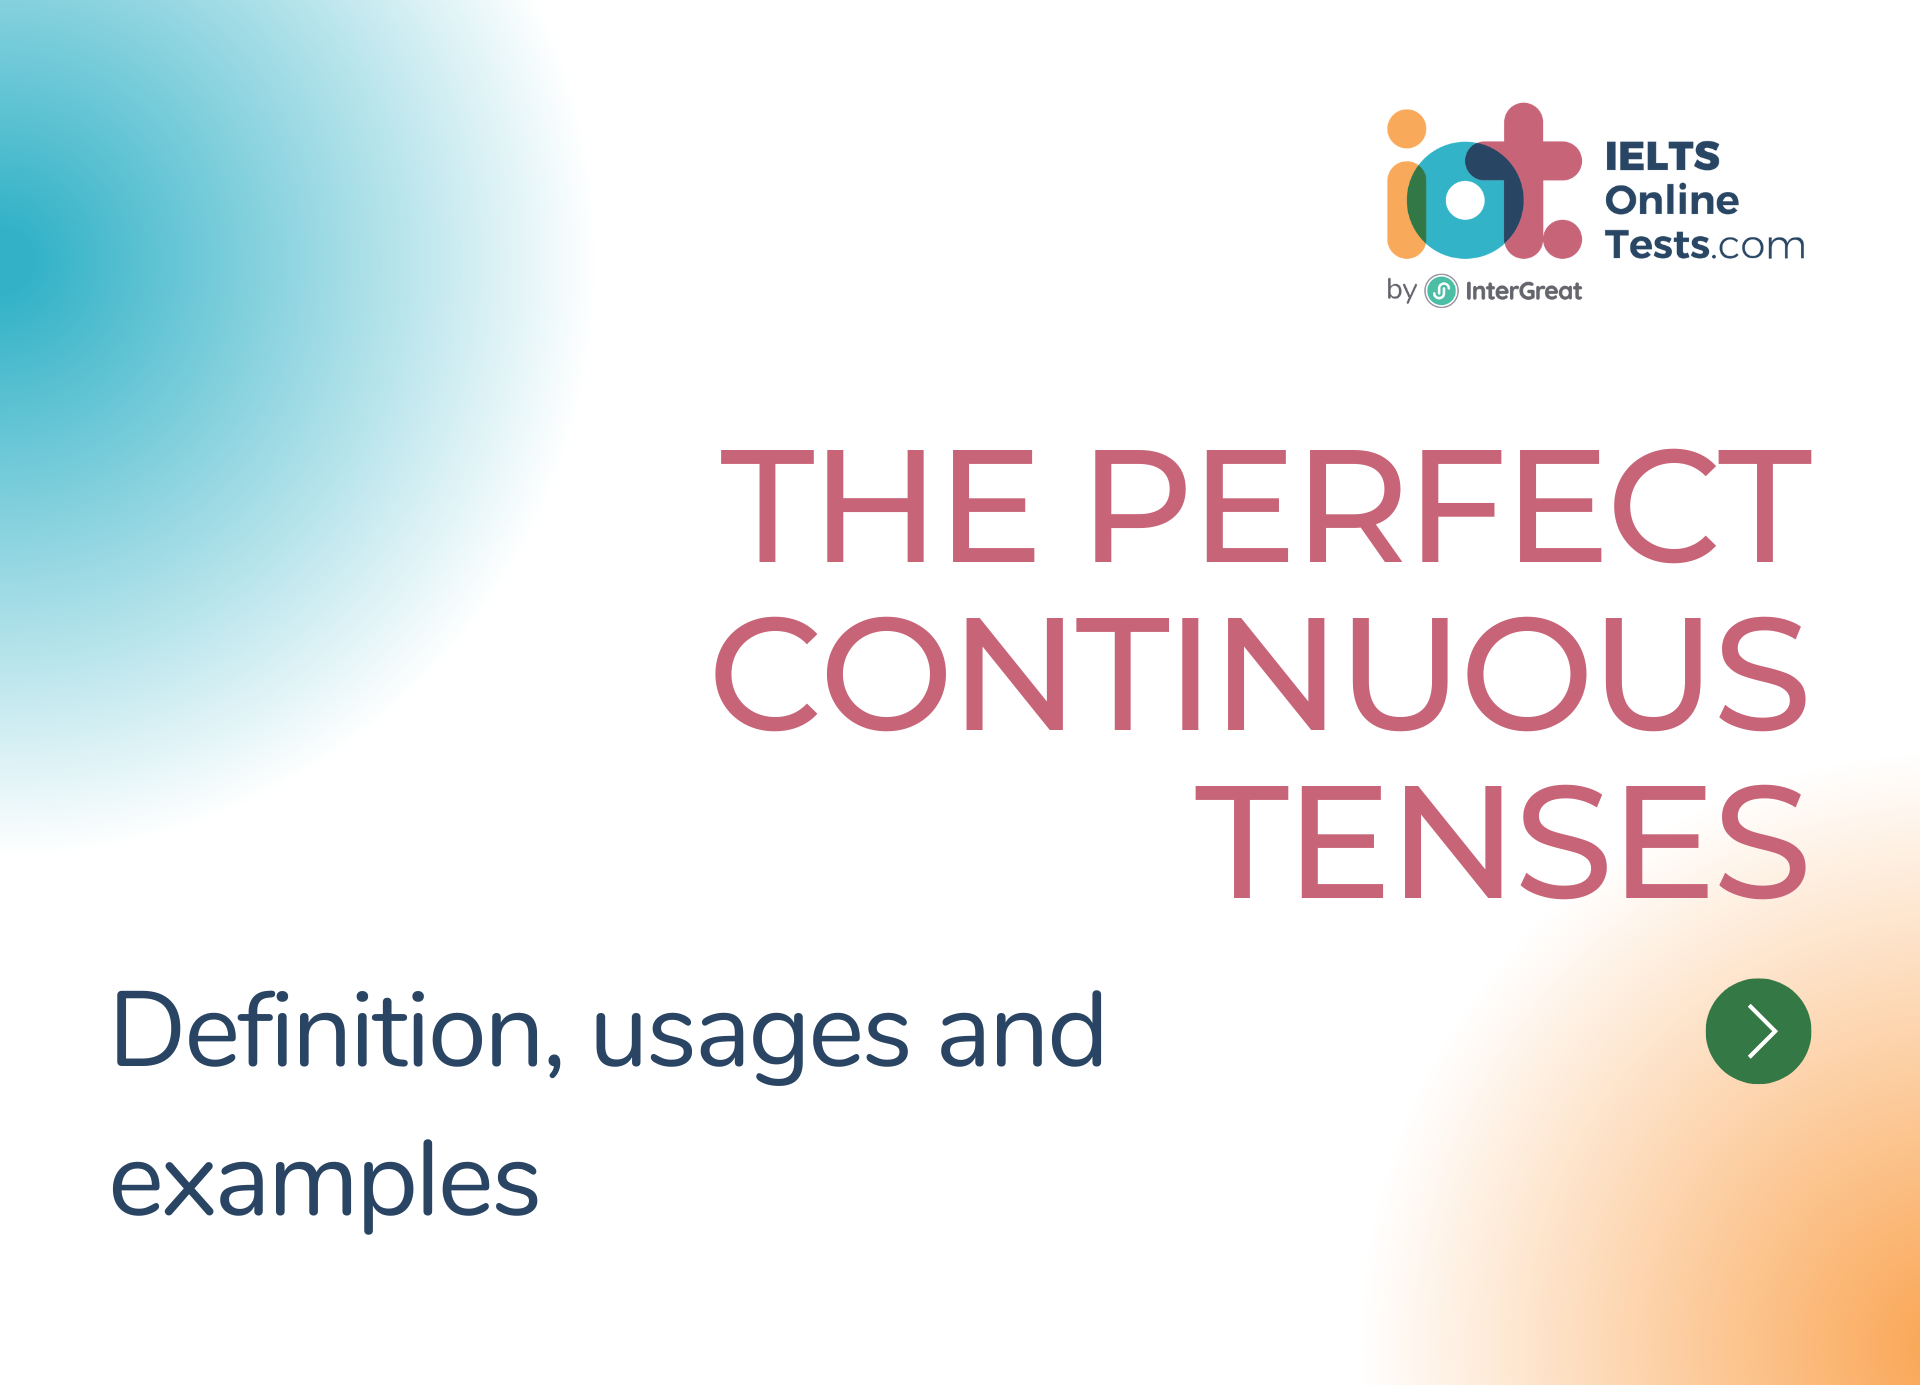 The perfect continuous tenses in English grammar